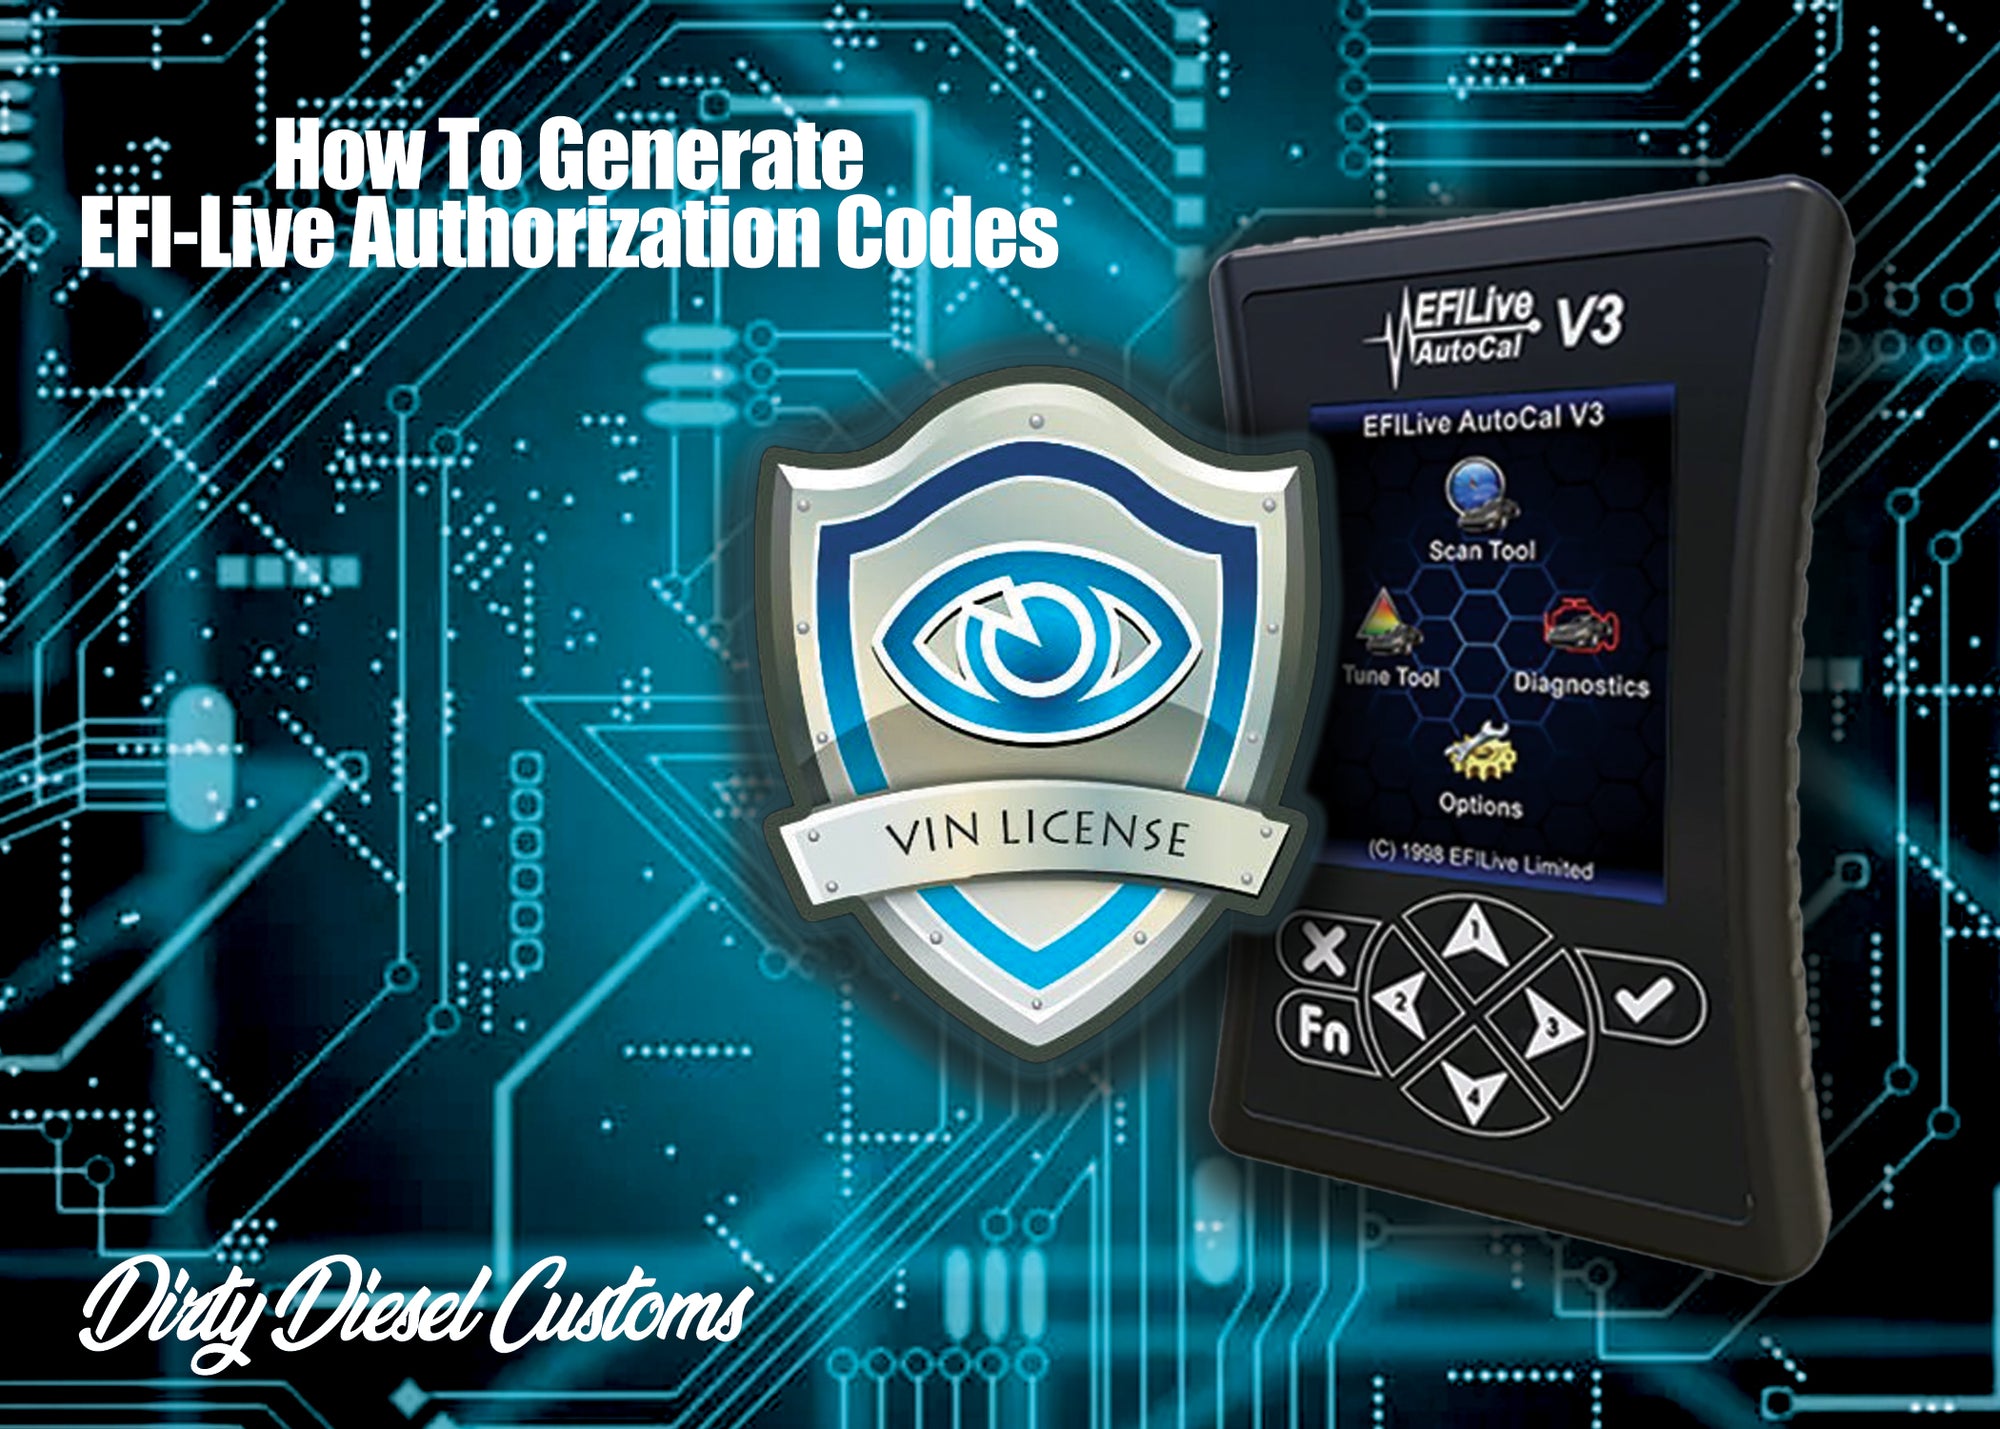 How To Generate EFI Authorization Codes